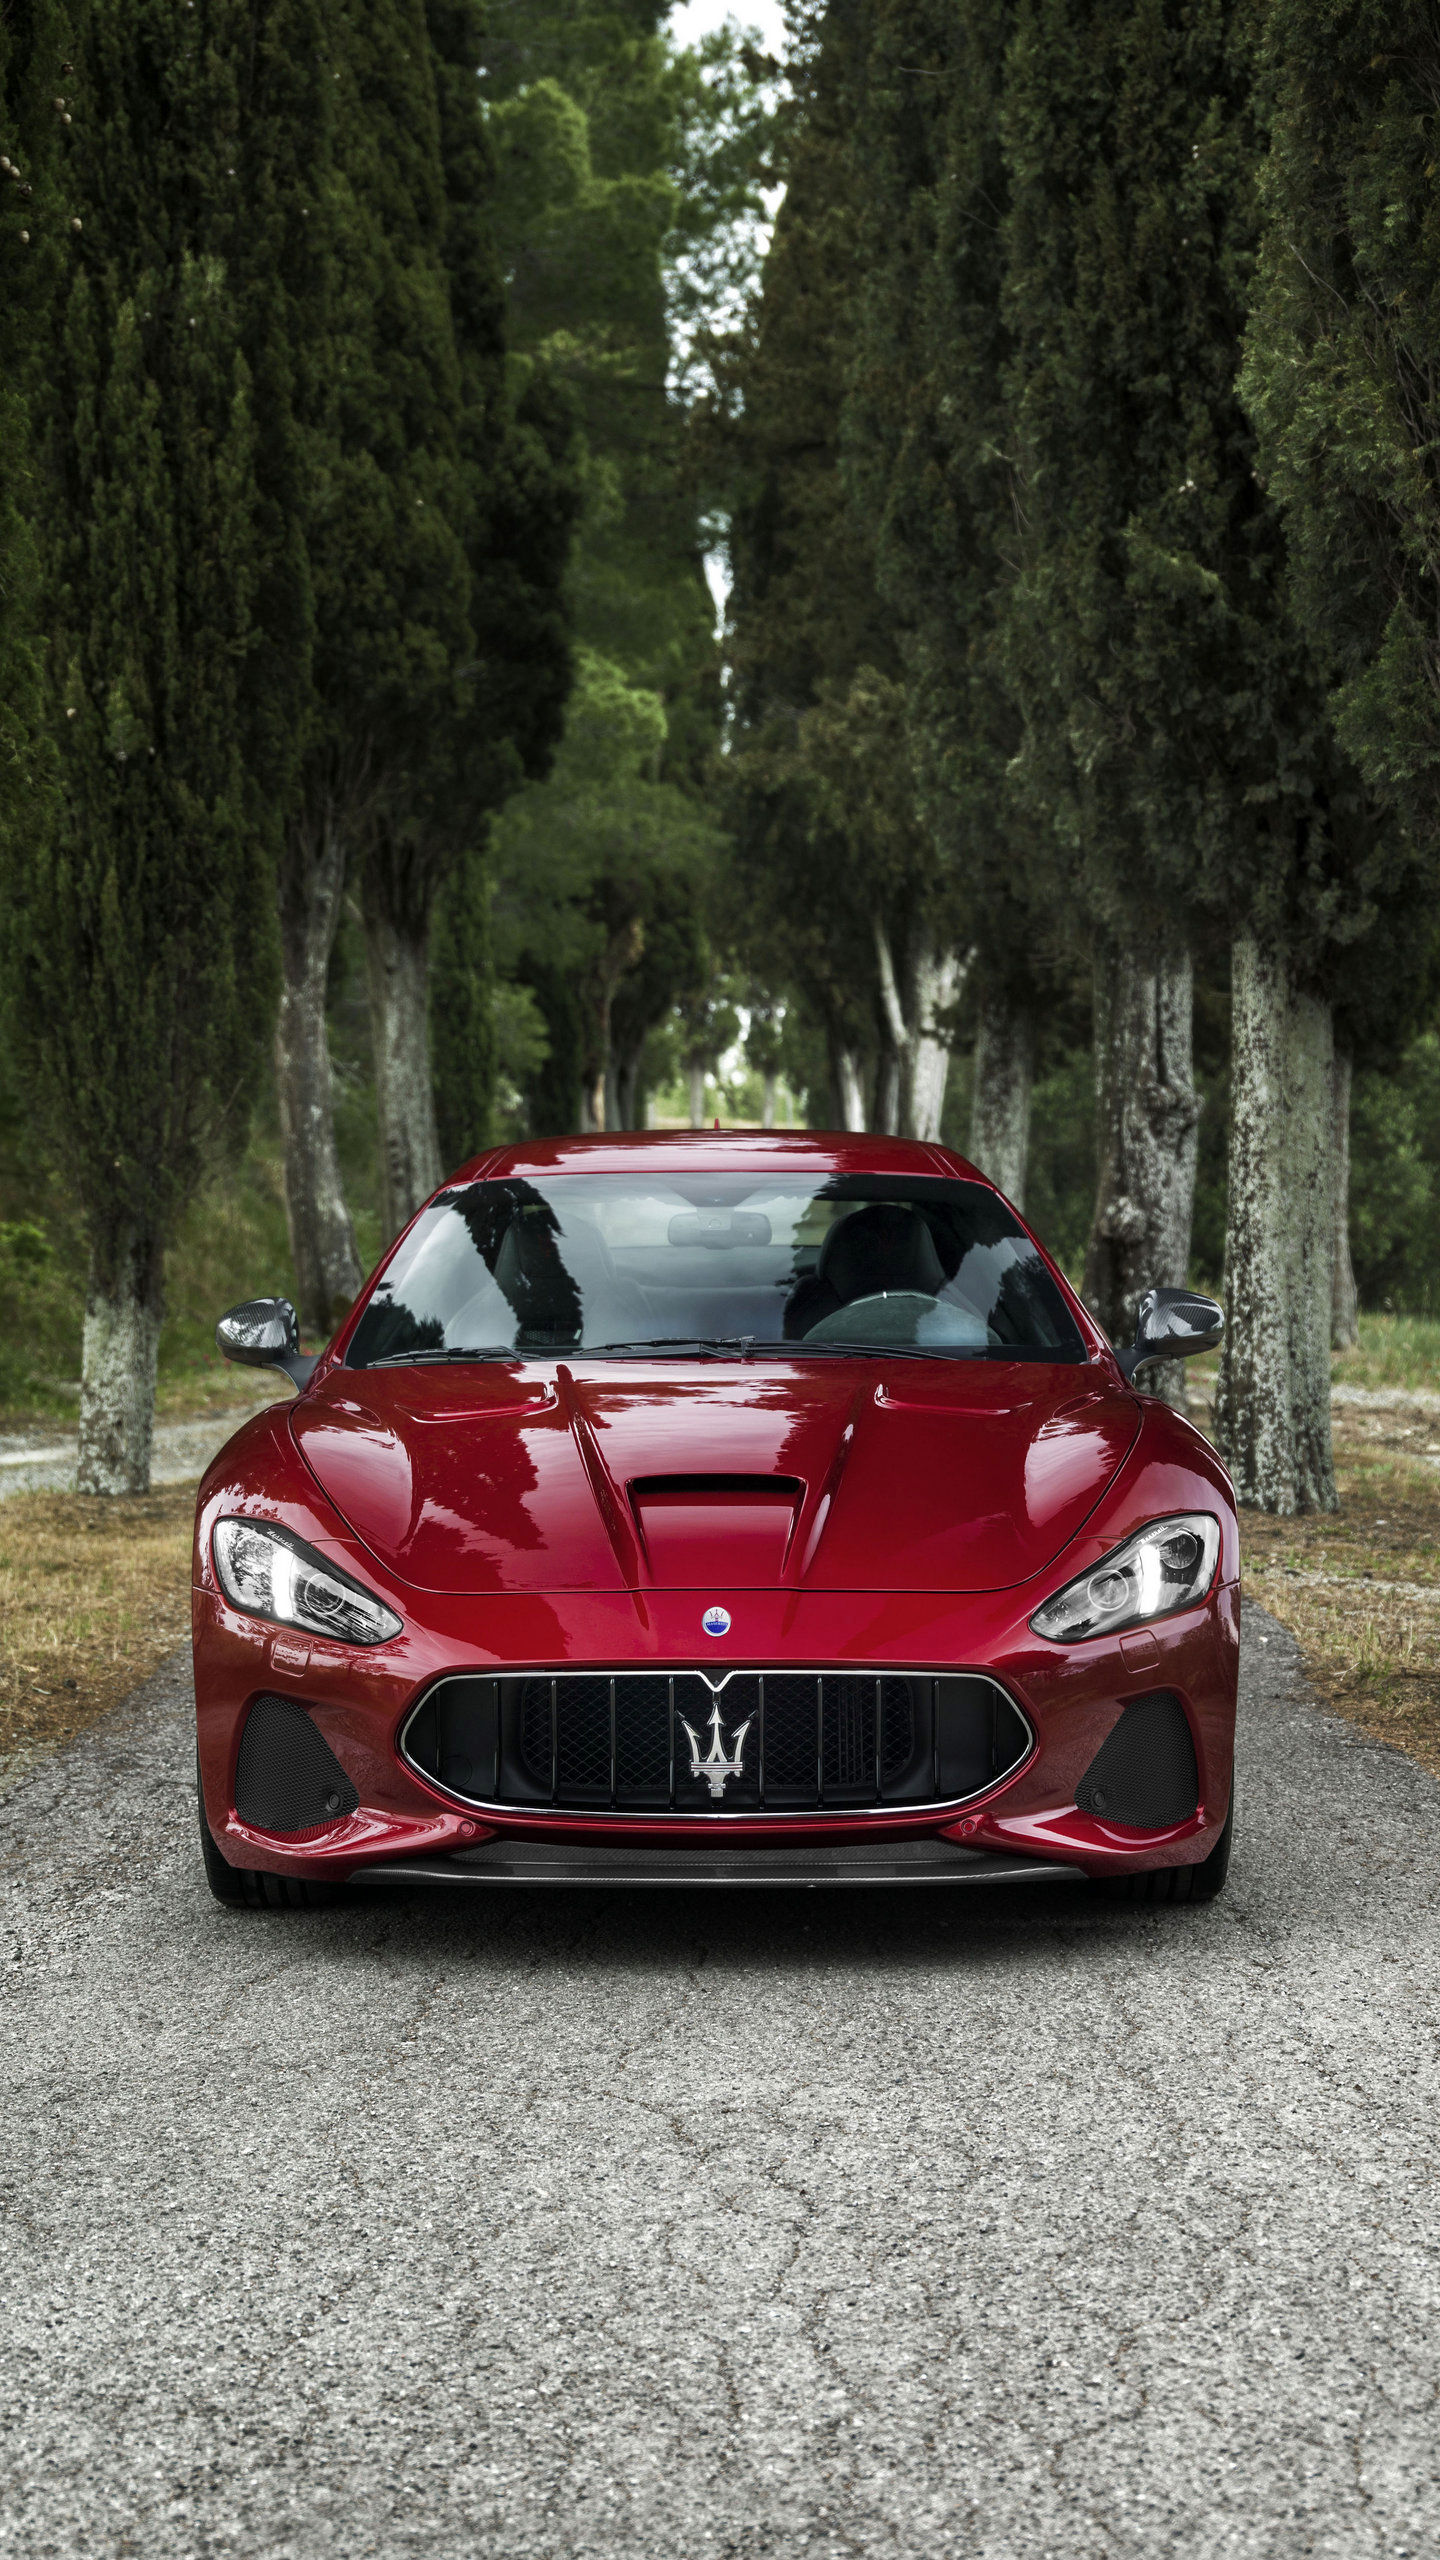 Front view of Red GranTurismo inside woods